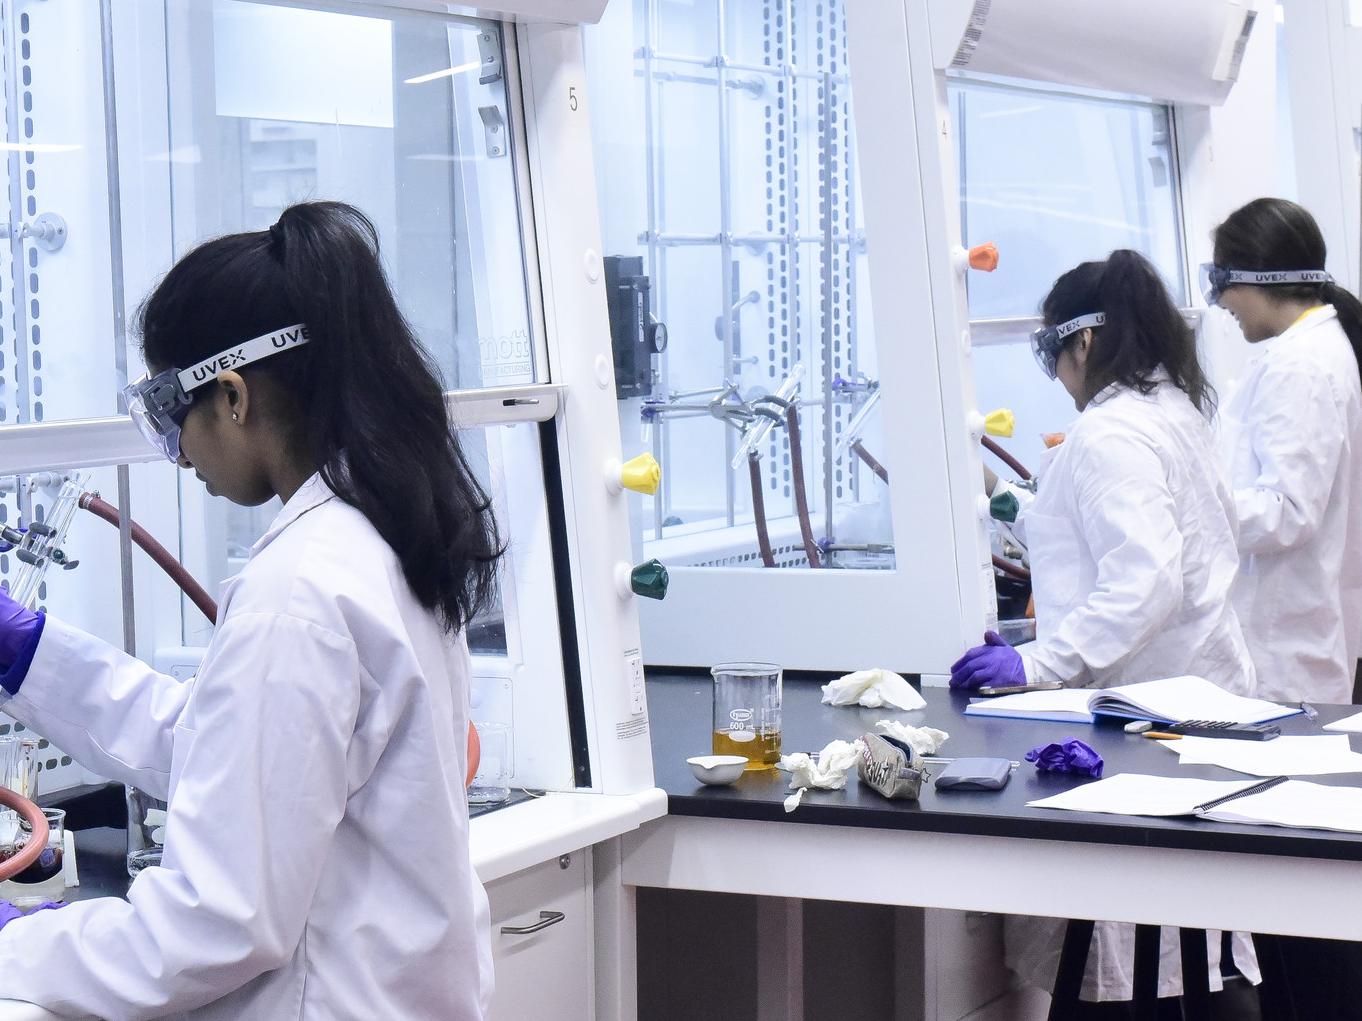 Students in a lab in front of a bank of equipment